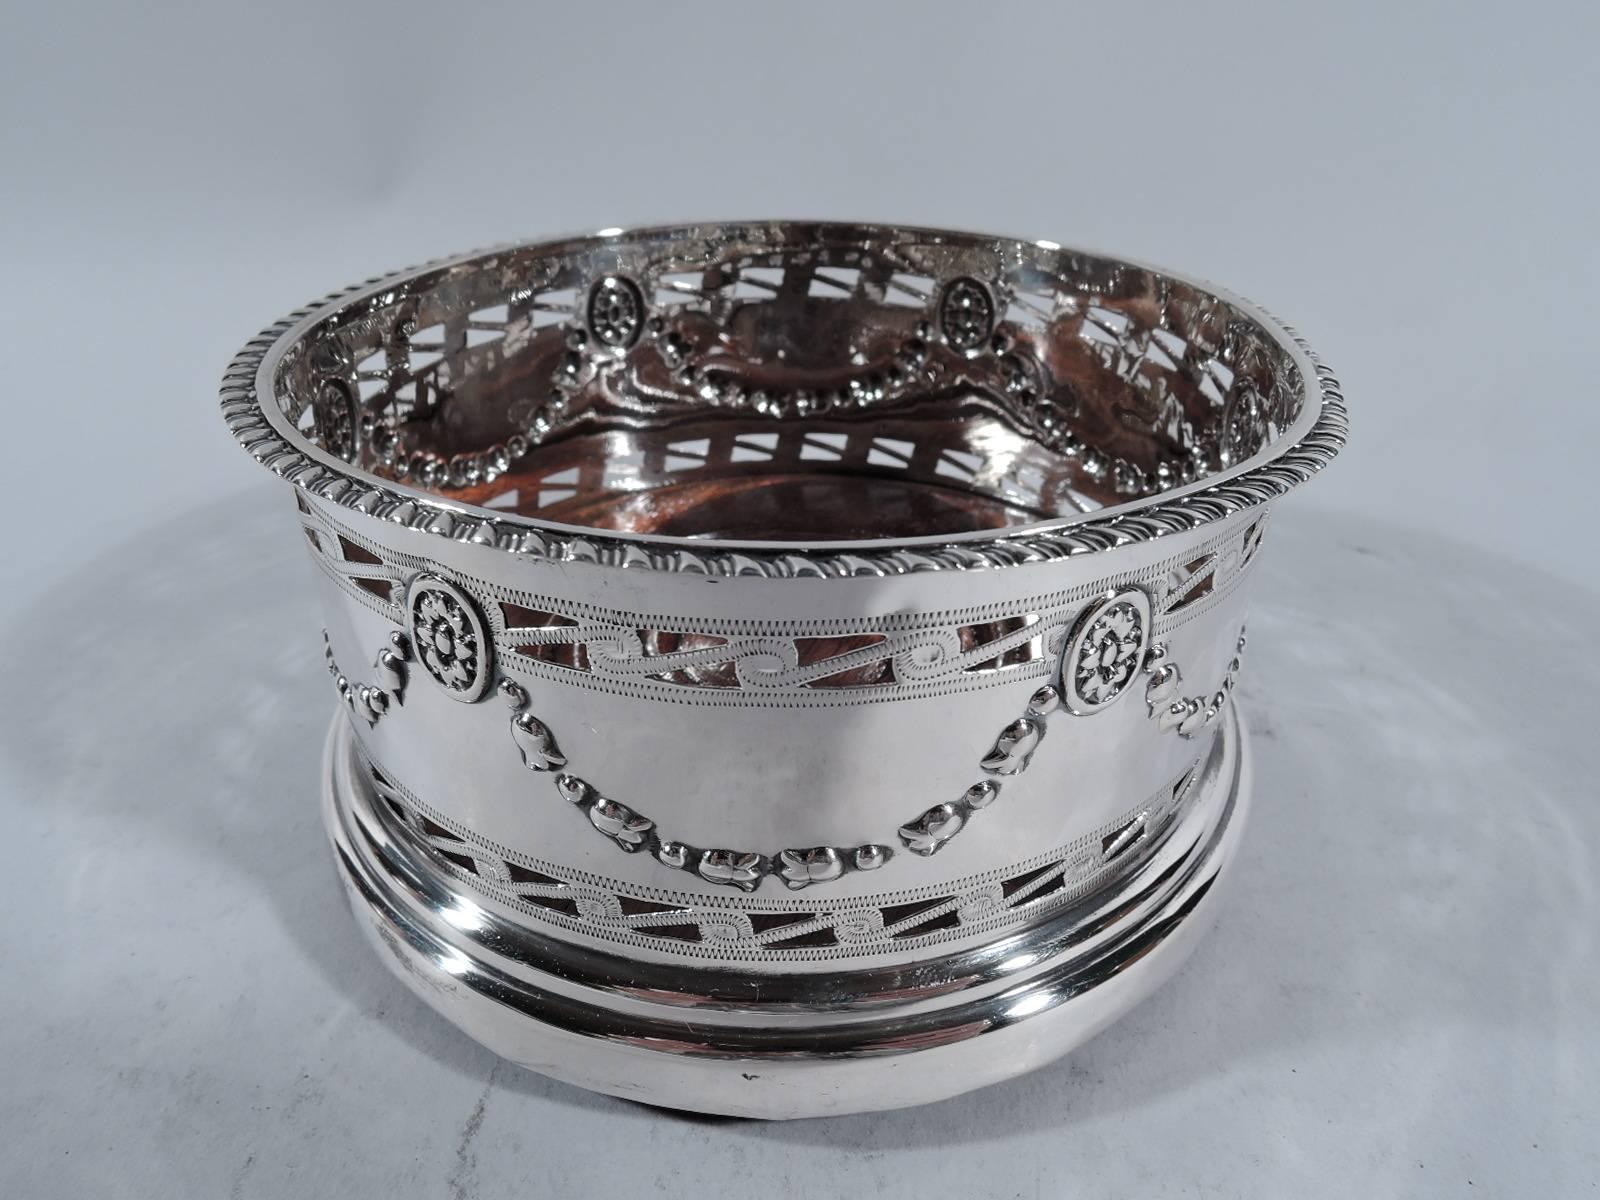 Edwardian sterling silver wine bottle coaster. Made by George Nathan and Ridley Hayes in Chester in 1905. Repousse garland with paterae between two bands of pierced Vitruvian scroll. Gadrooned rim. Stained-wood and felt-lined well. A charming and